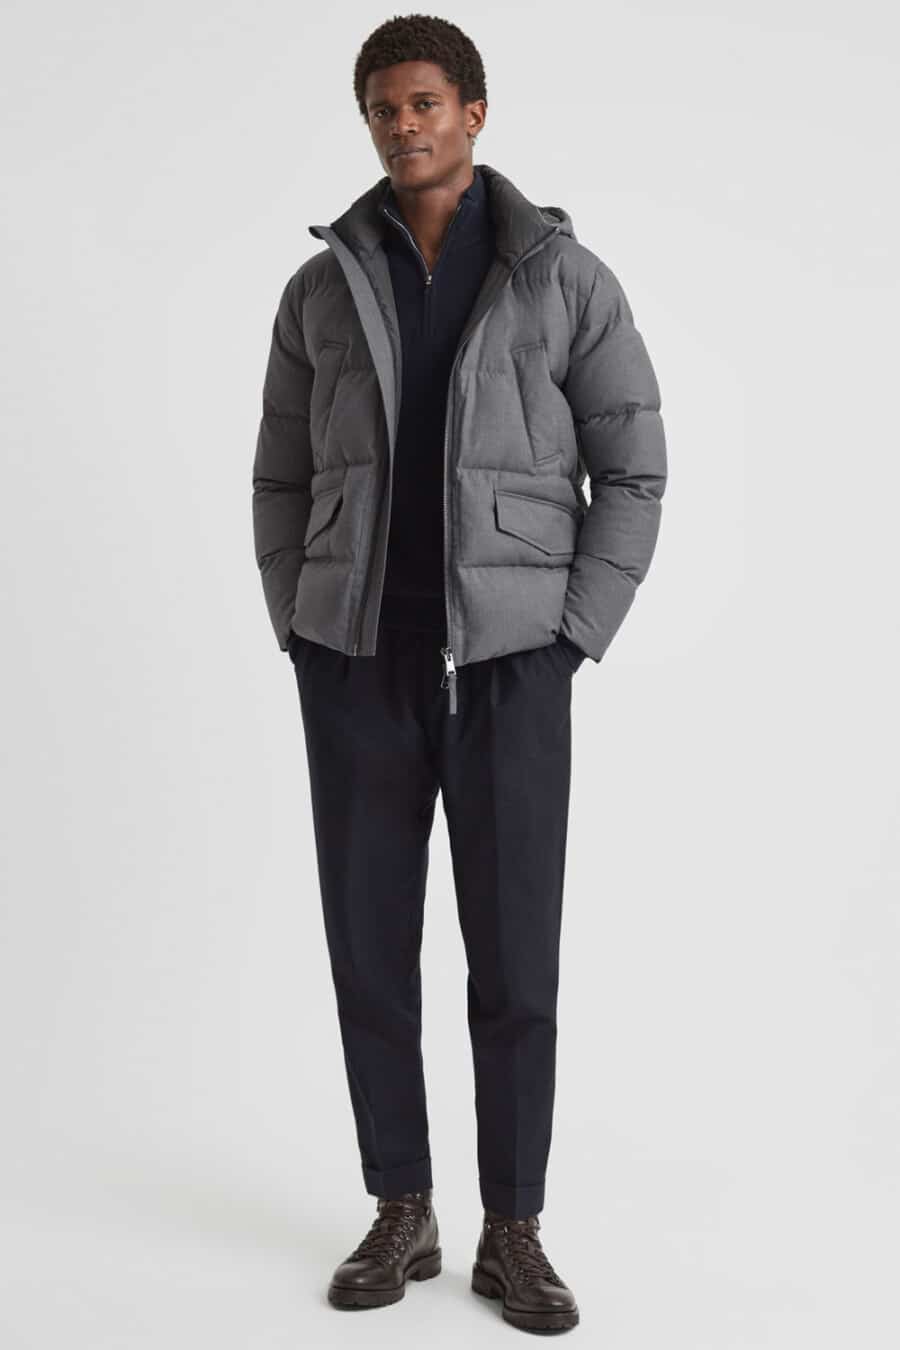 Men's navy tailored pants, navy zip neck sweater, grey puffer jacket and brown leather boots outfit